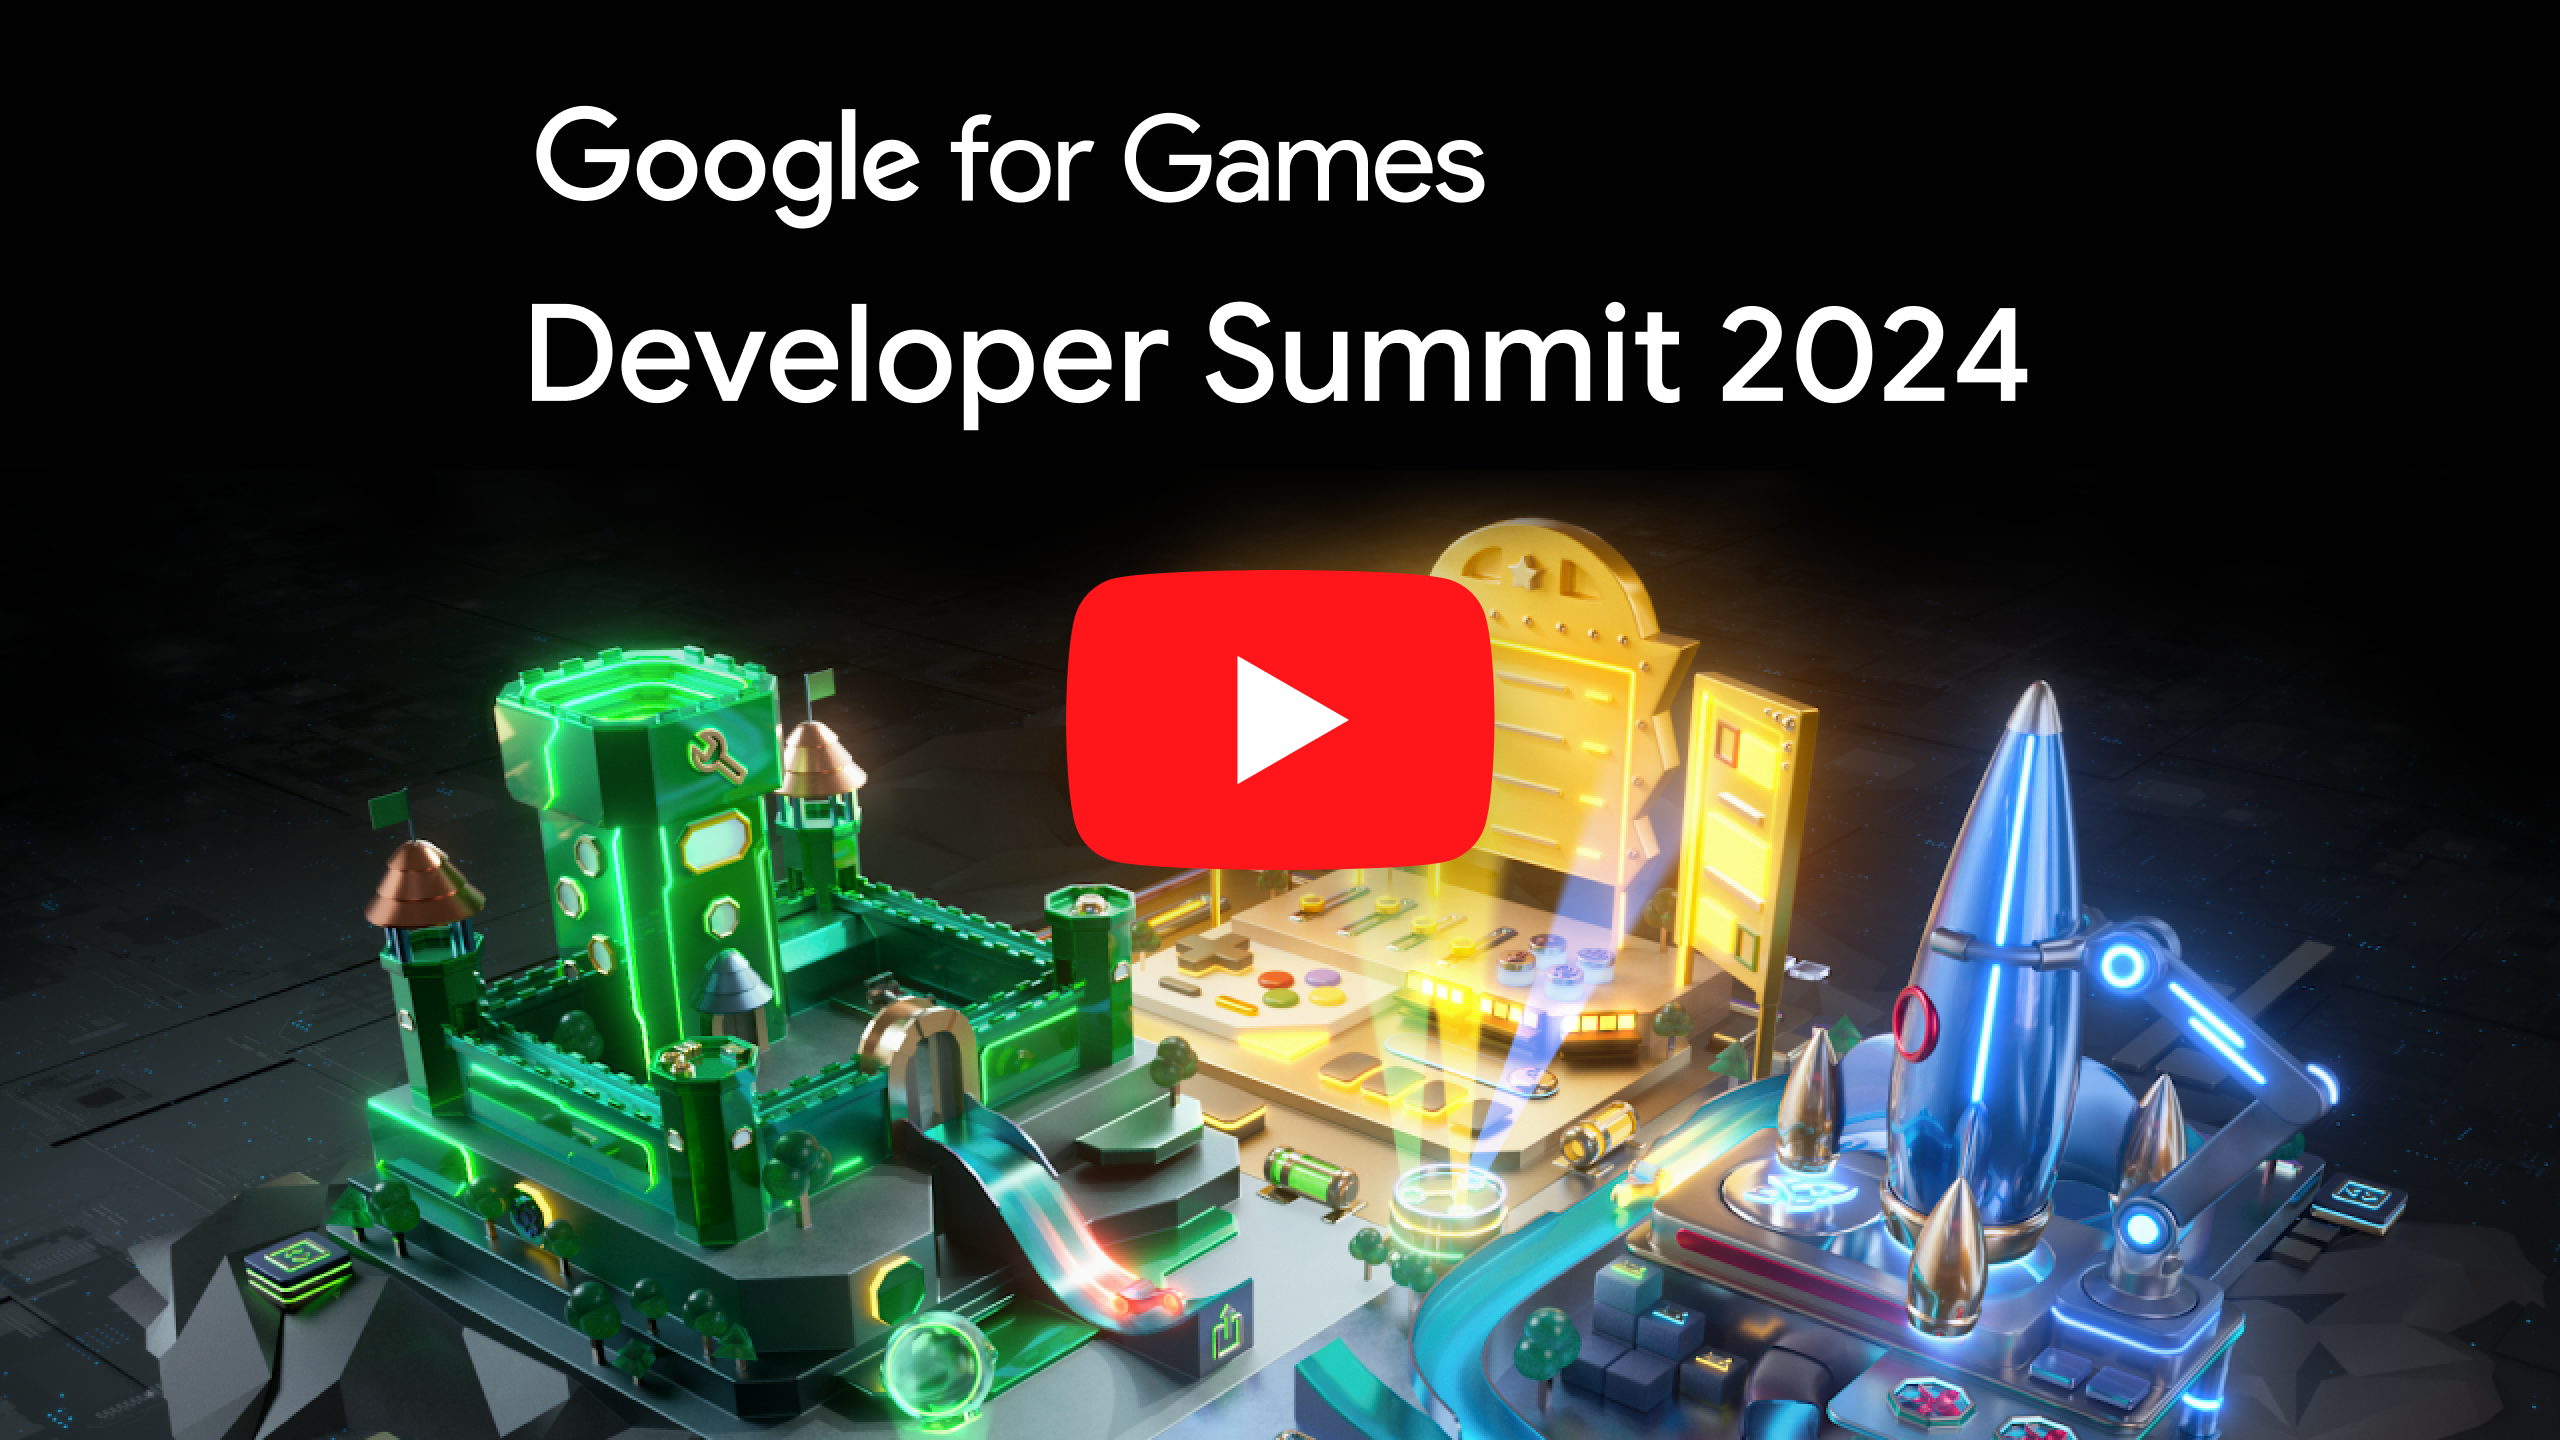 A YouTube thumbnail of the Google for Games Developer Summit 2024